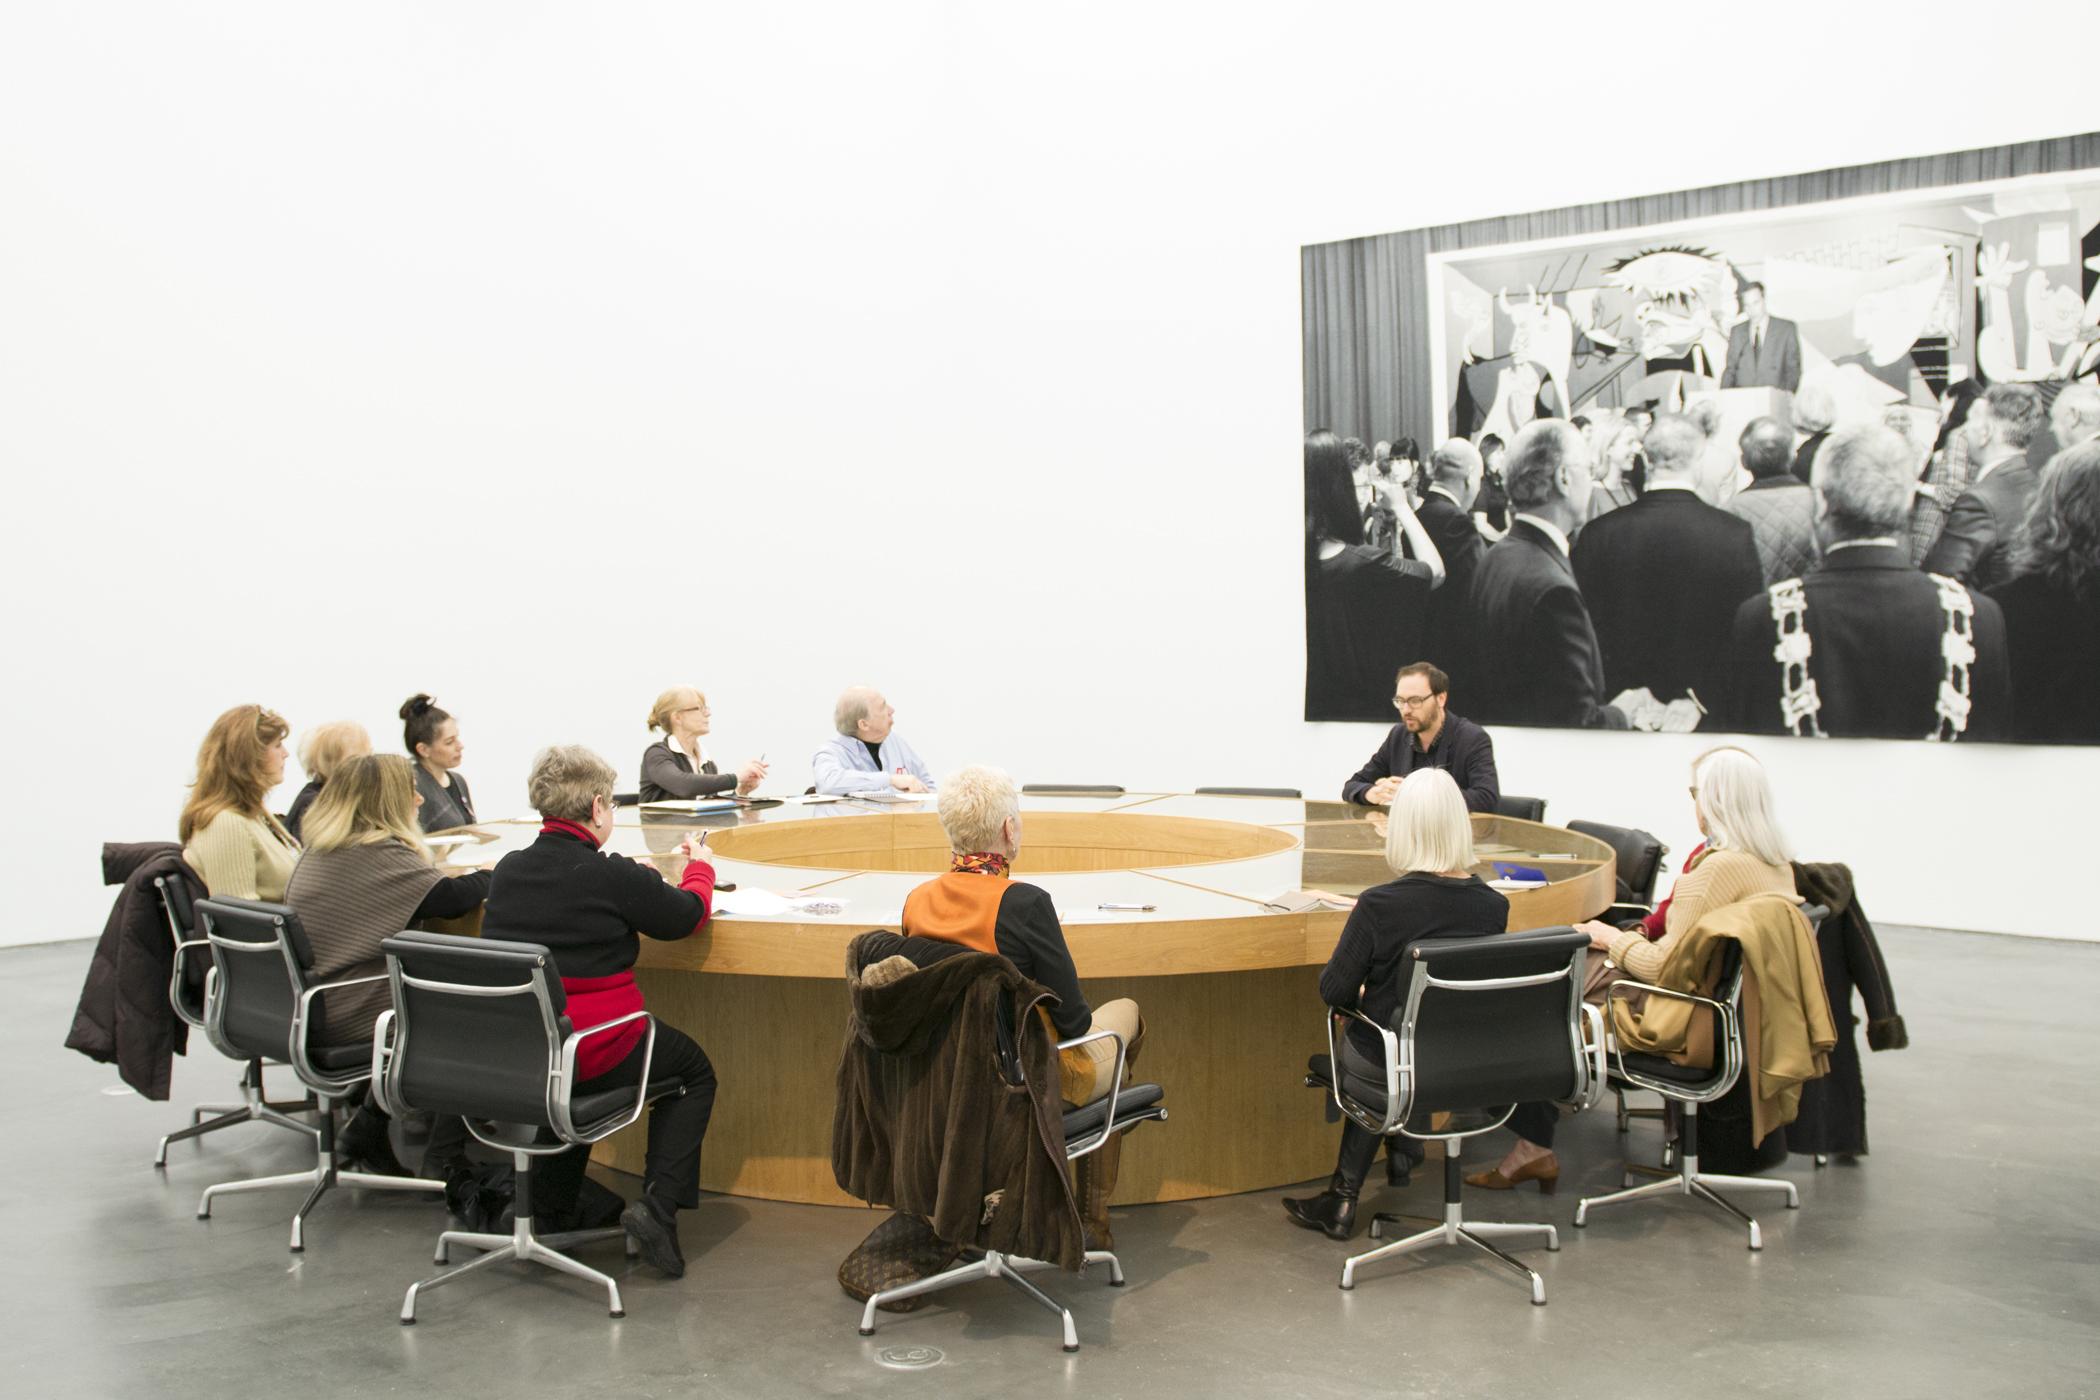 Twelve people sit in black swivel chairs around a circular conference table in front of a large photograph of a crowd listening to a speaker.